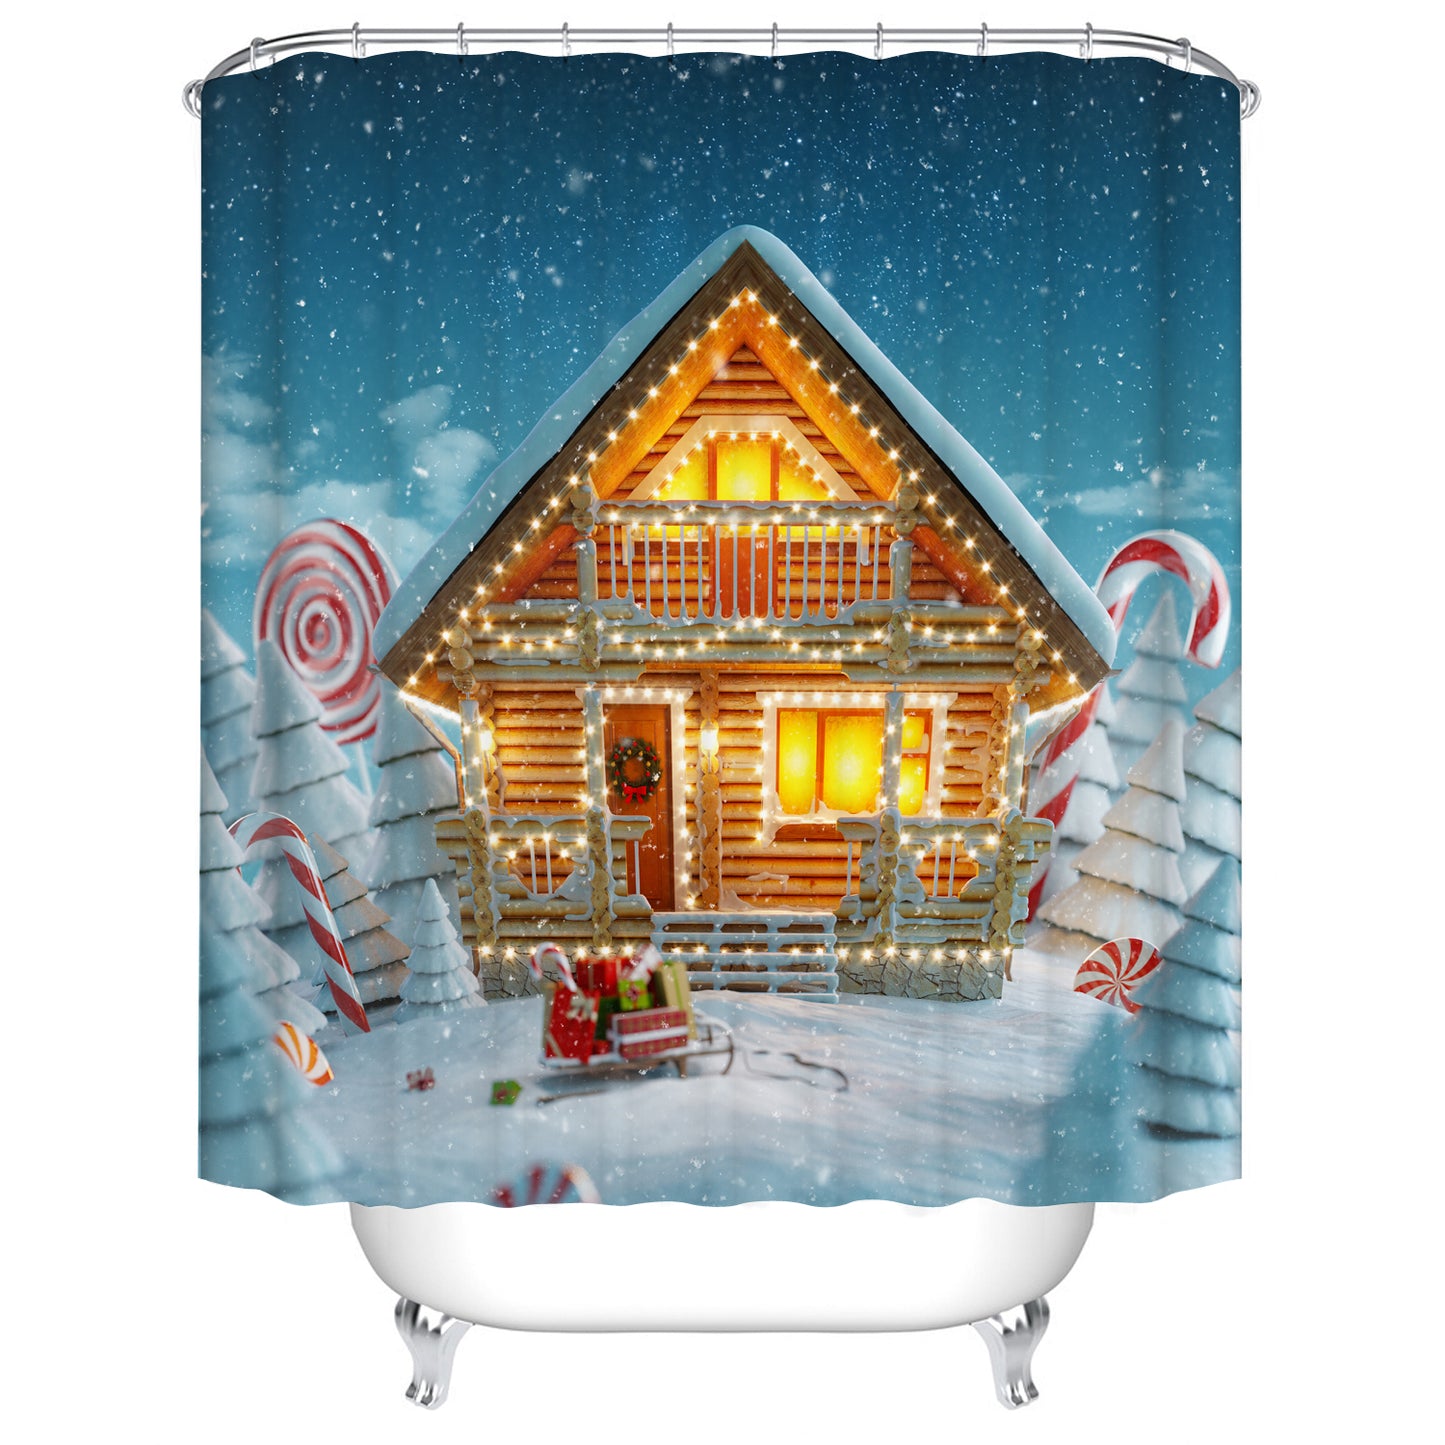 Enchanting Fairytale Cabin Gingerbread House Decorated of Christmas Lights Gingerbread Shower Curtain